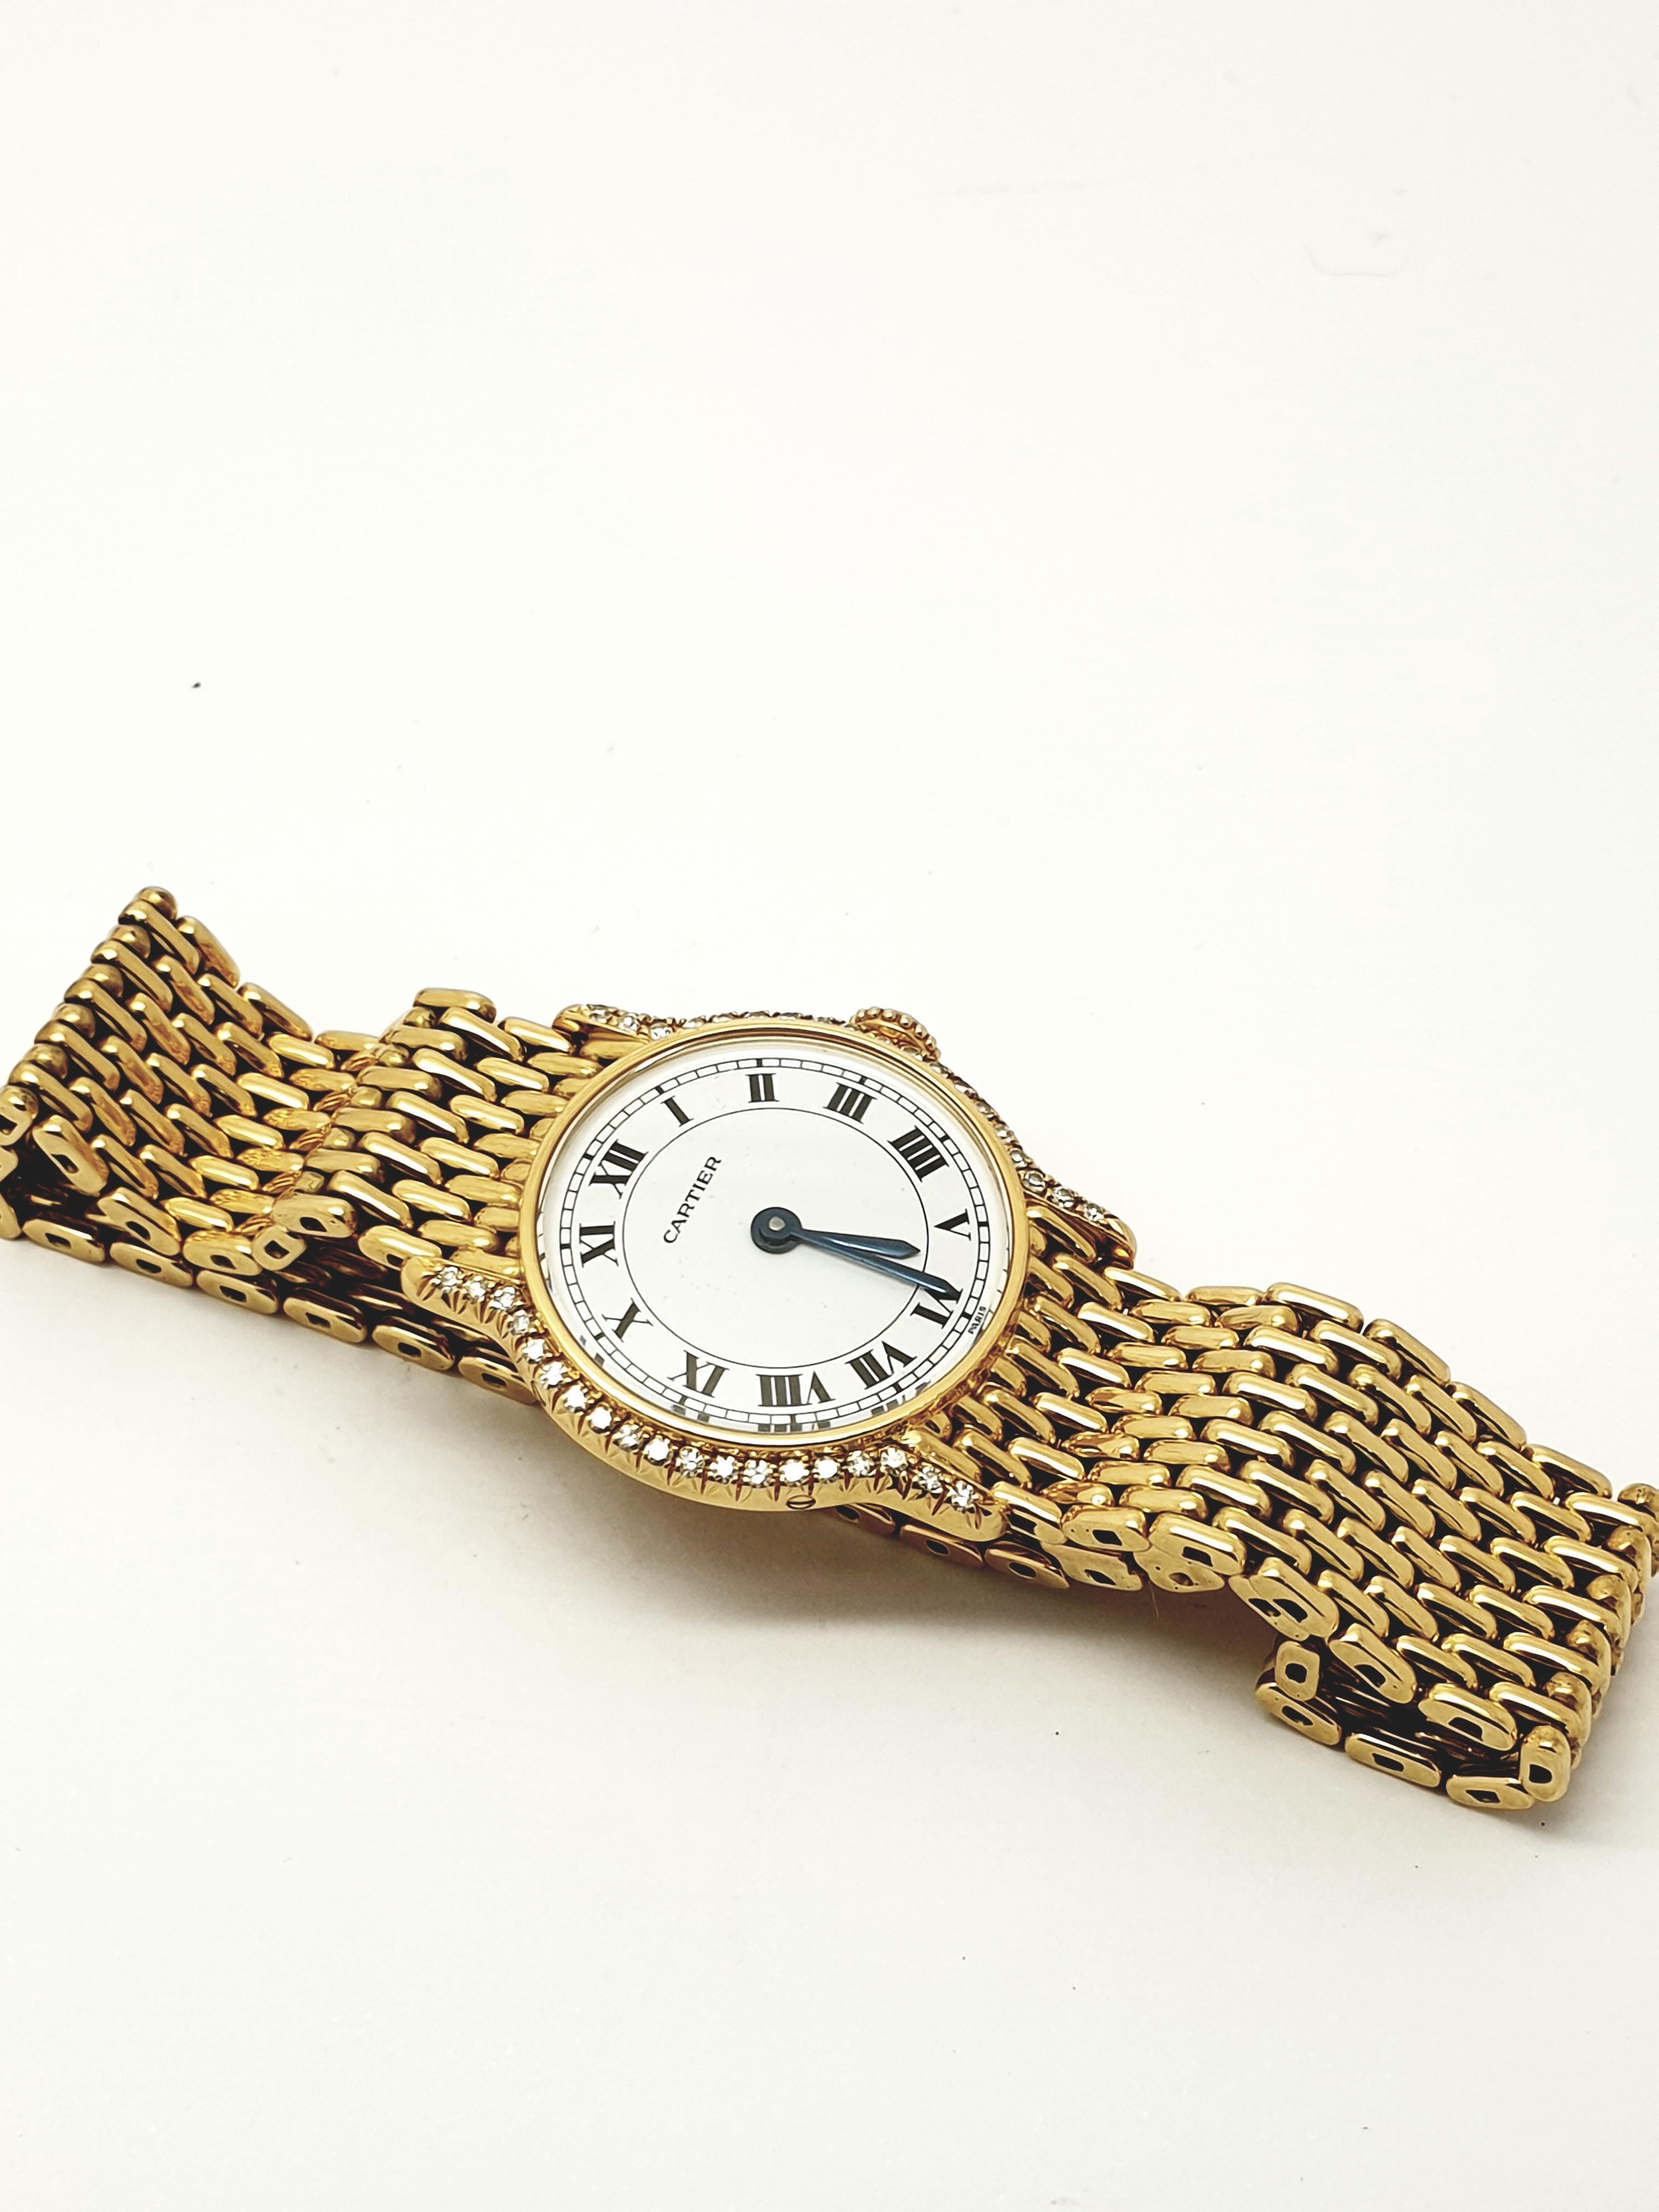 Offering this beautiful petite Cartier watch . It is in excellent condition . The case  diameter is 26 mm, set with small high quality diamonds. The dial  has the traditional Cartier black roman numerals. The 18 ct yellow gold bracelet is attached